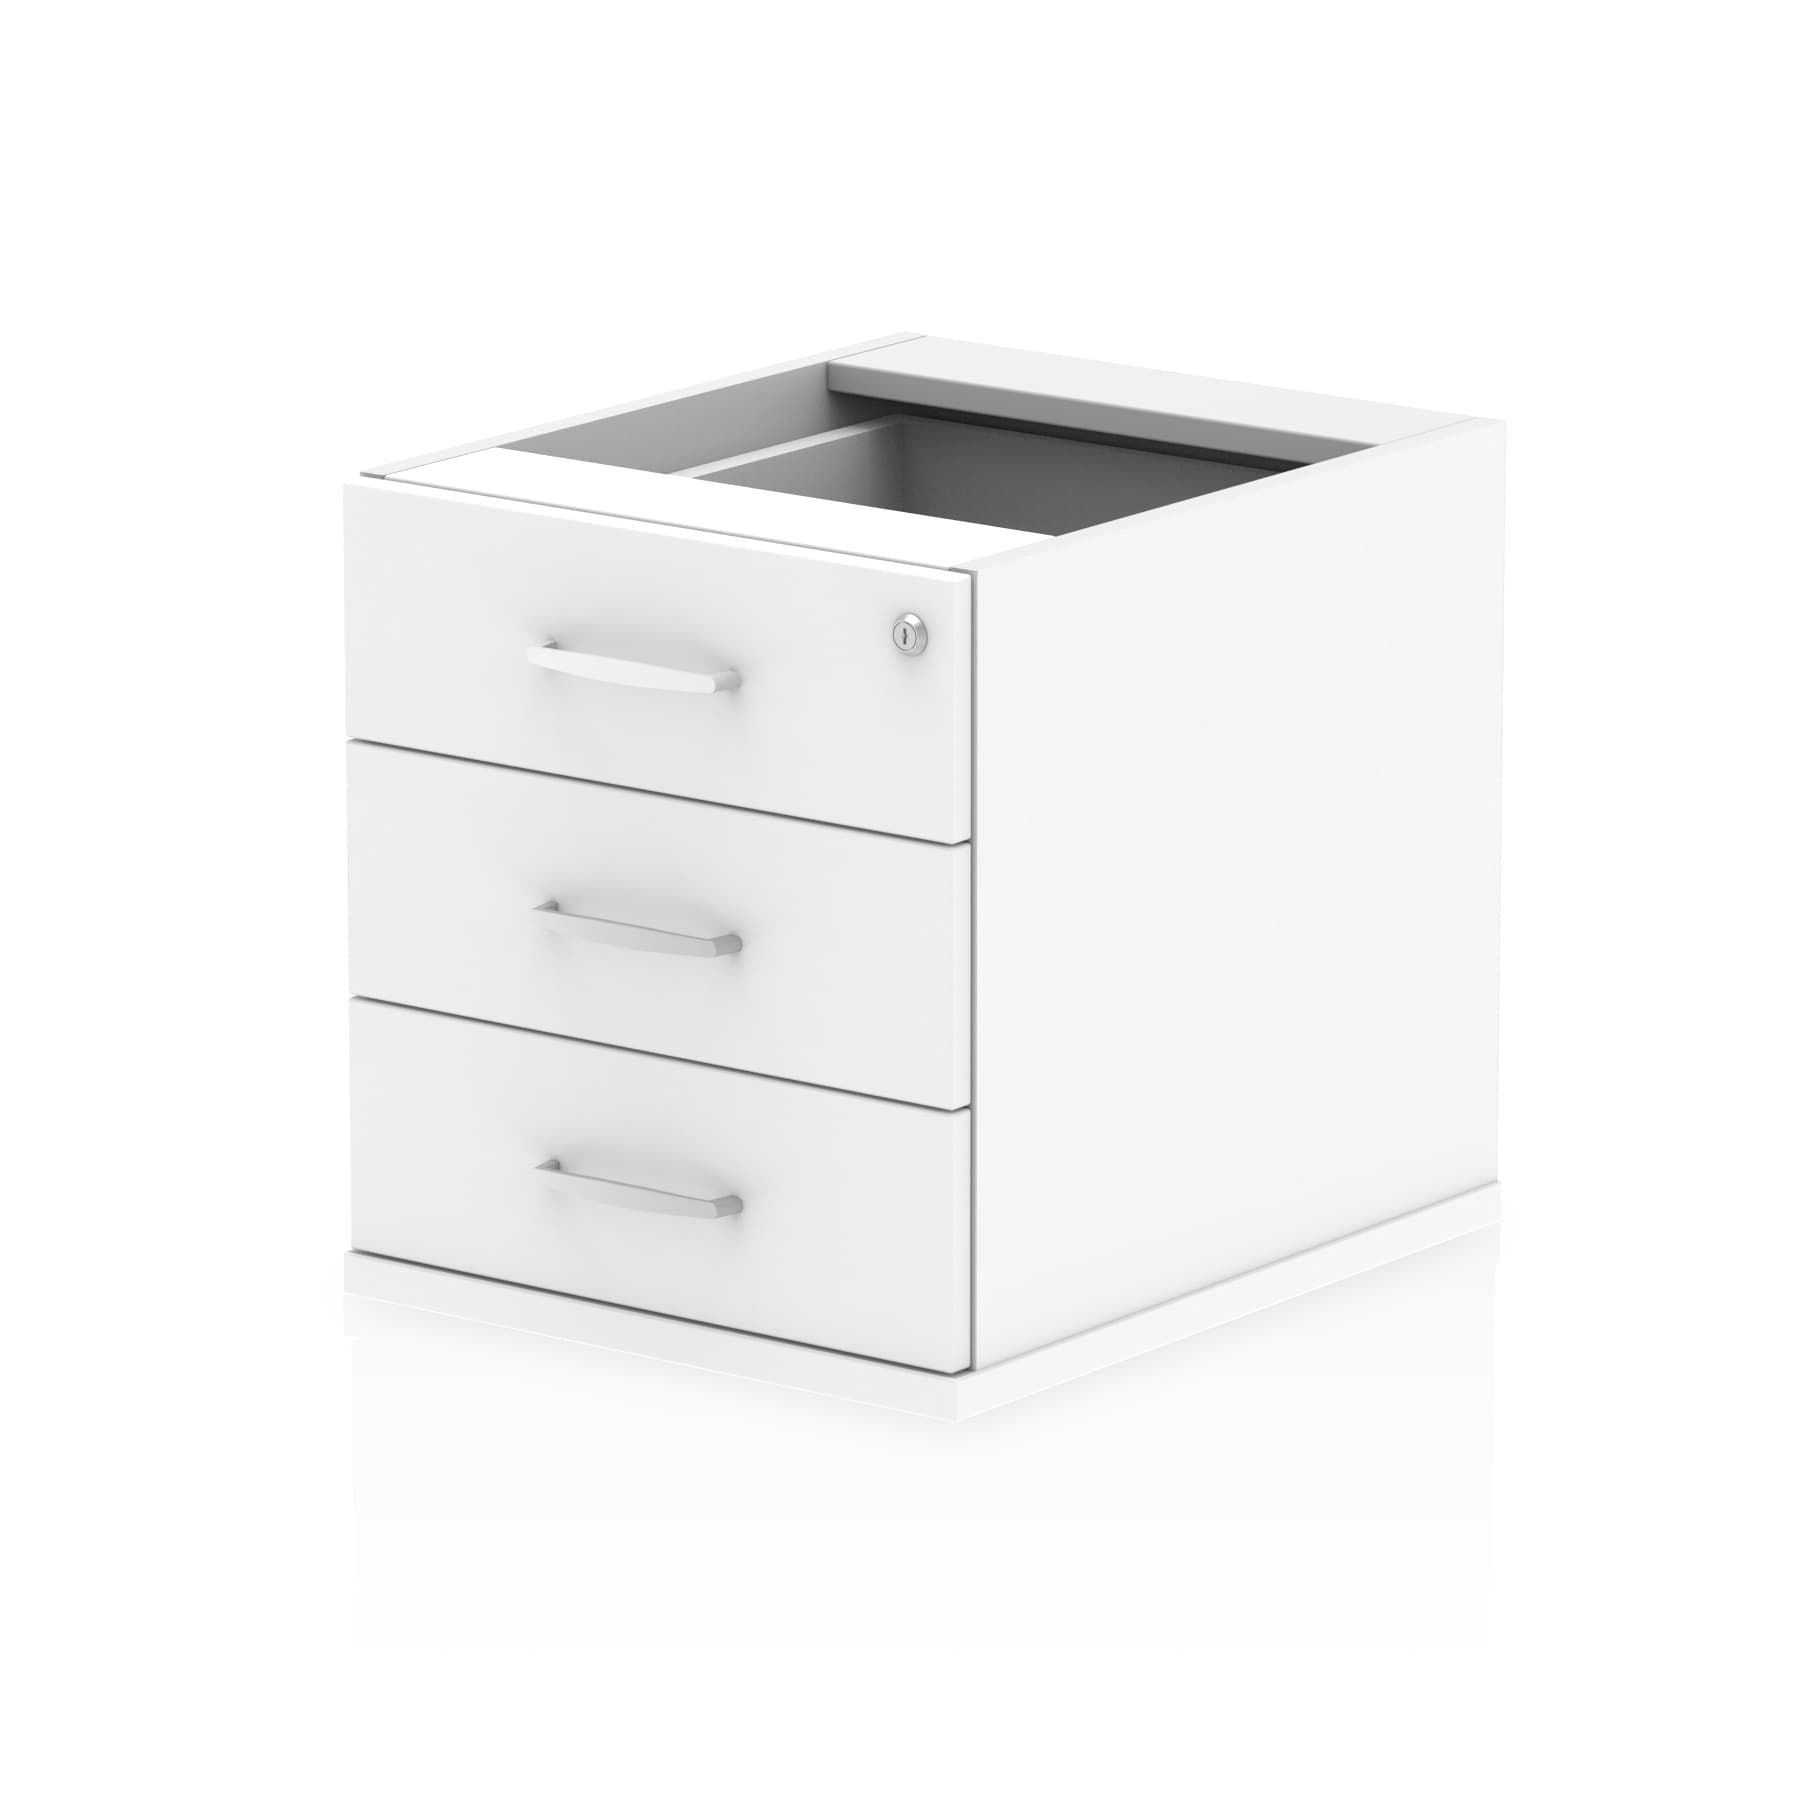 Impulse Fixed Pedestal - 2/3 Lockable Drawers, MFC Material, Self-Assembly, 440x550x473mm, 25mm Thickness, 5-Year Guarantee